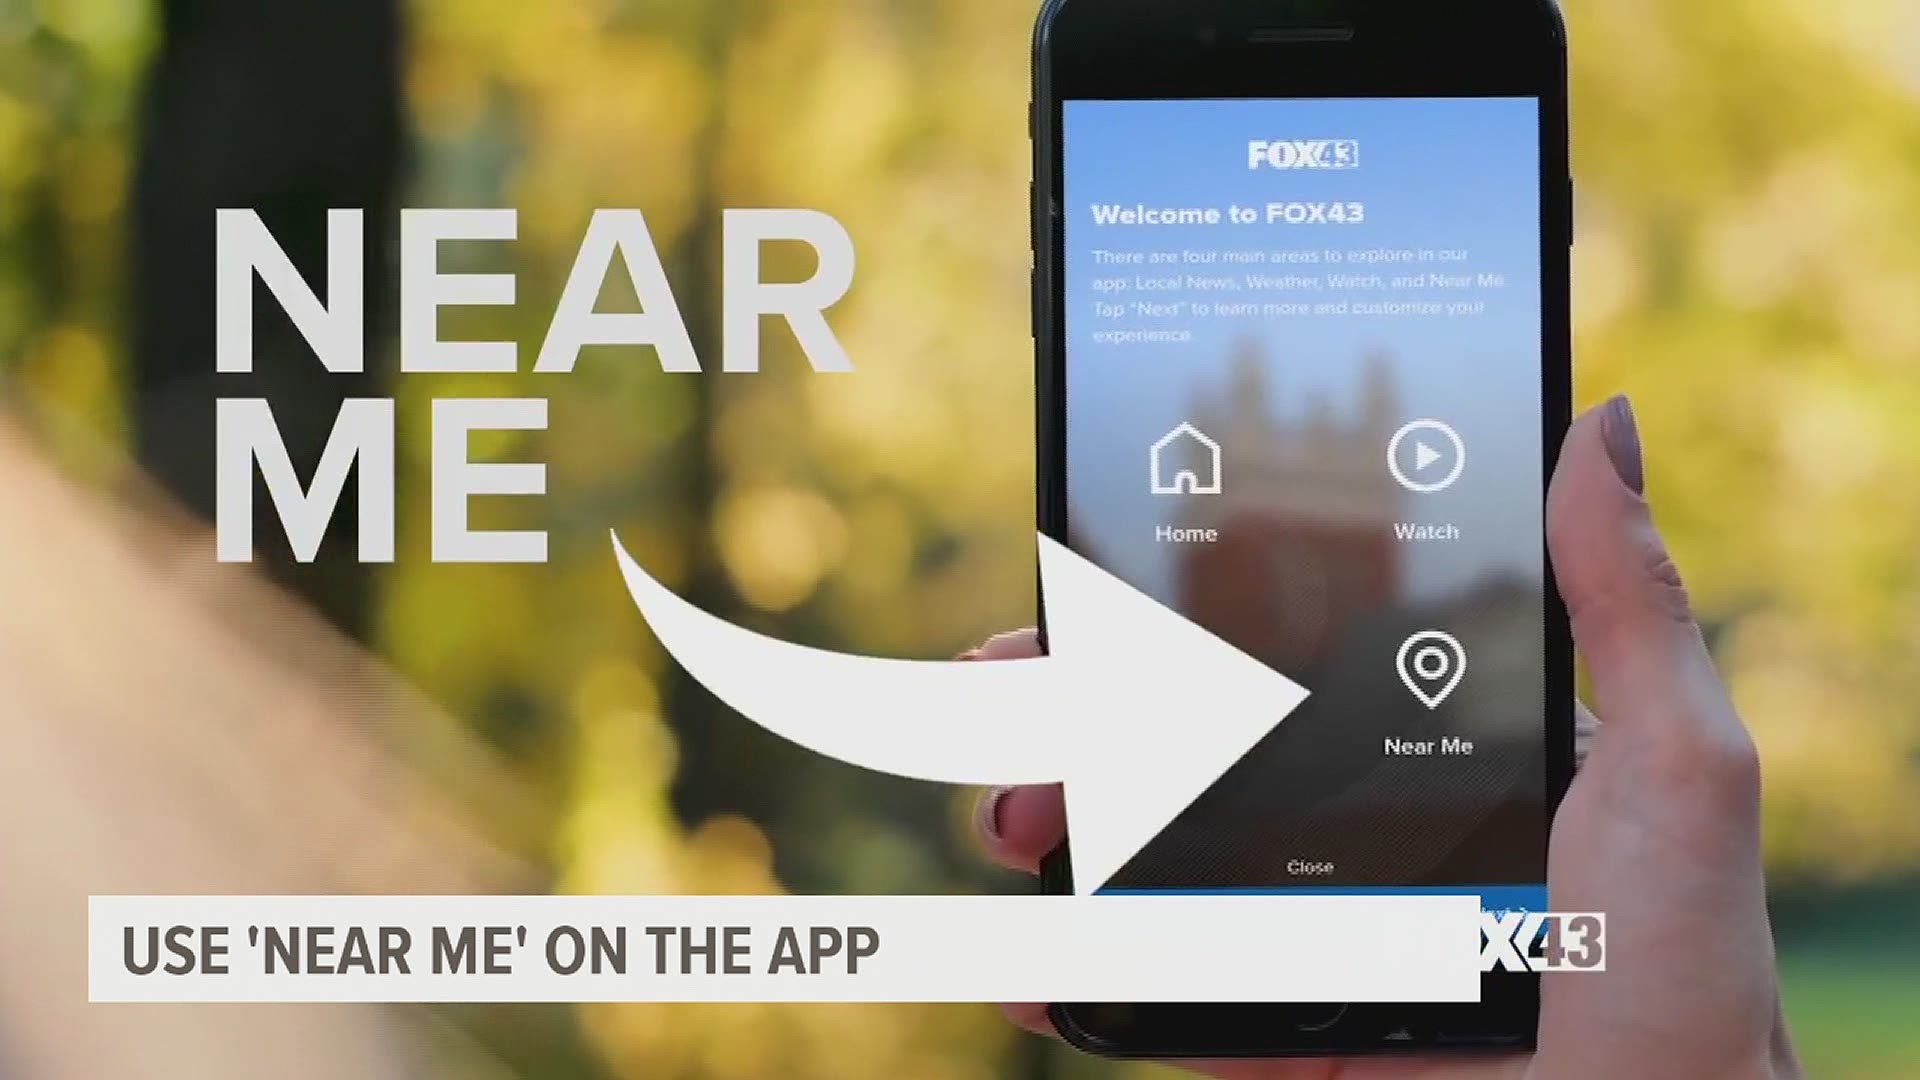 You can share photos and videos of news spotted in your neighborhood right in the FOX43 app, through the "Near Me" feature.